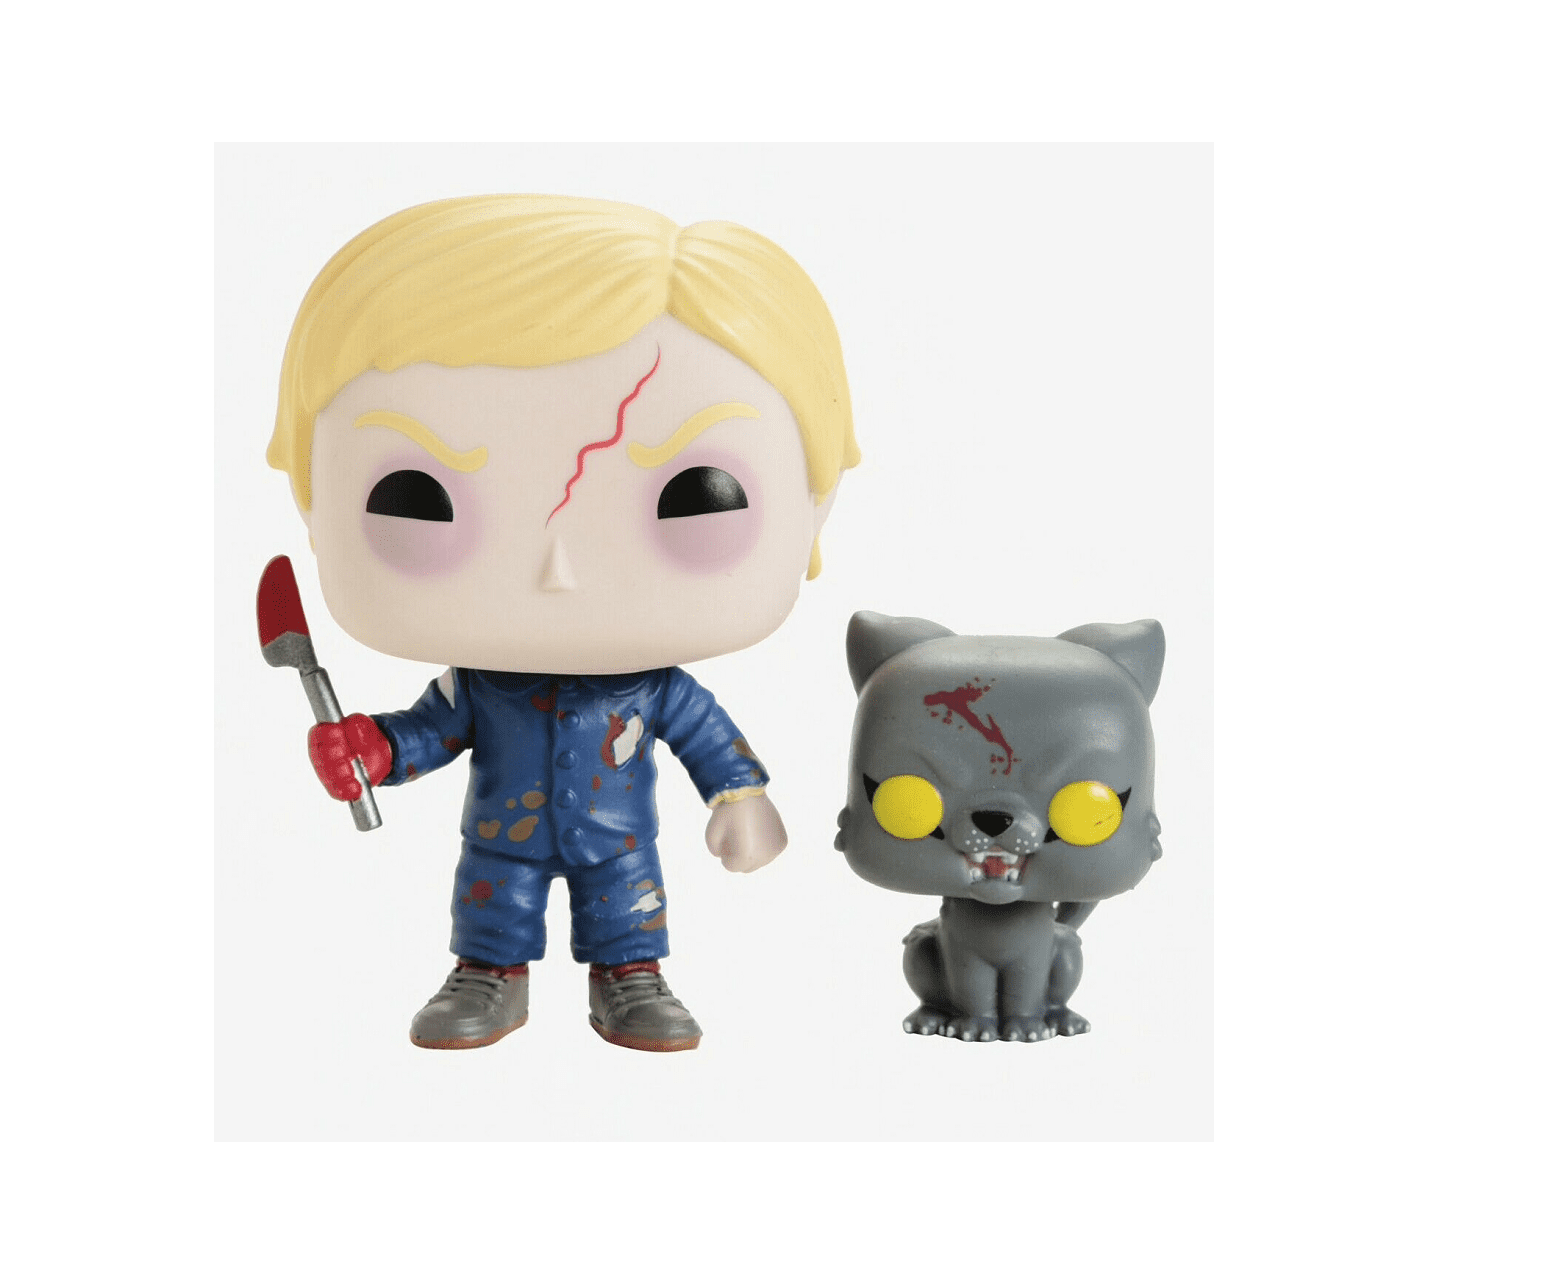 pet sematary action figures